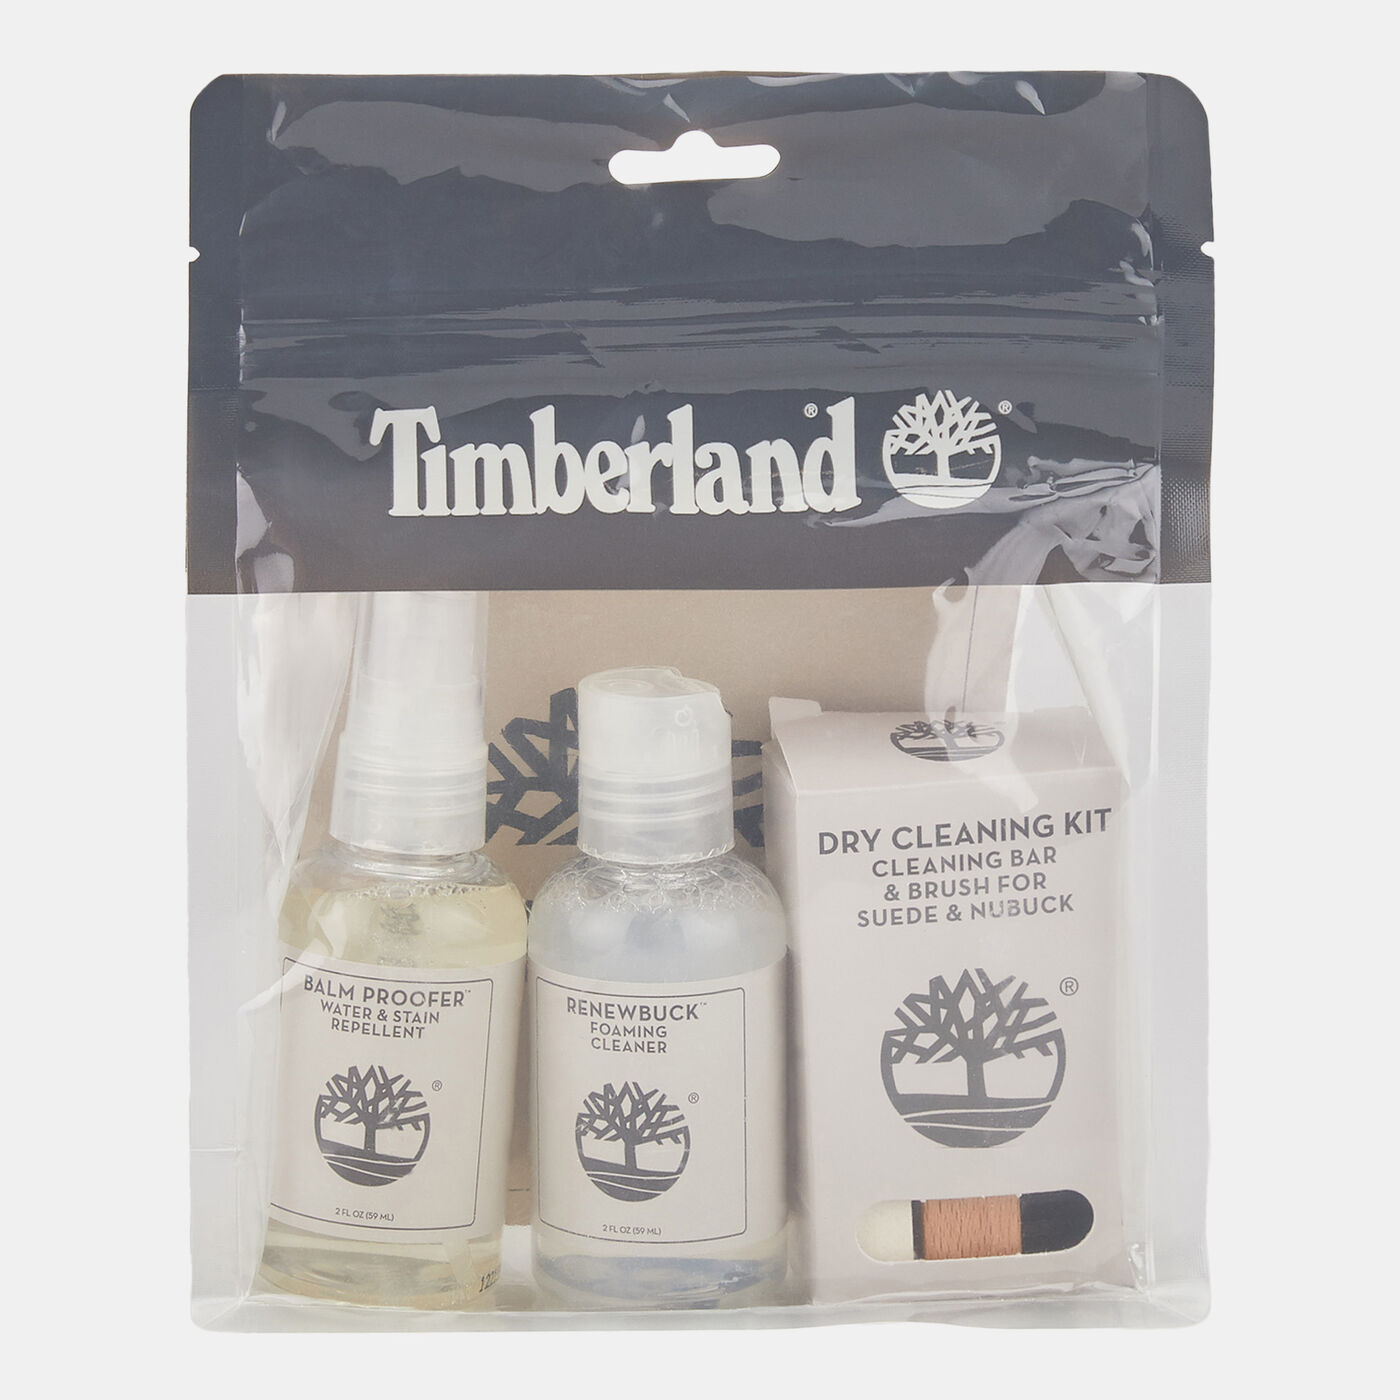 Product Care Travel Kit